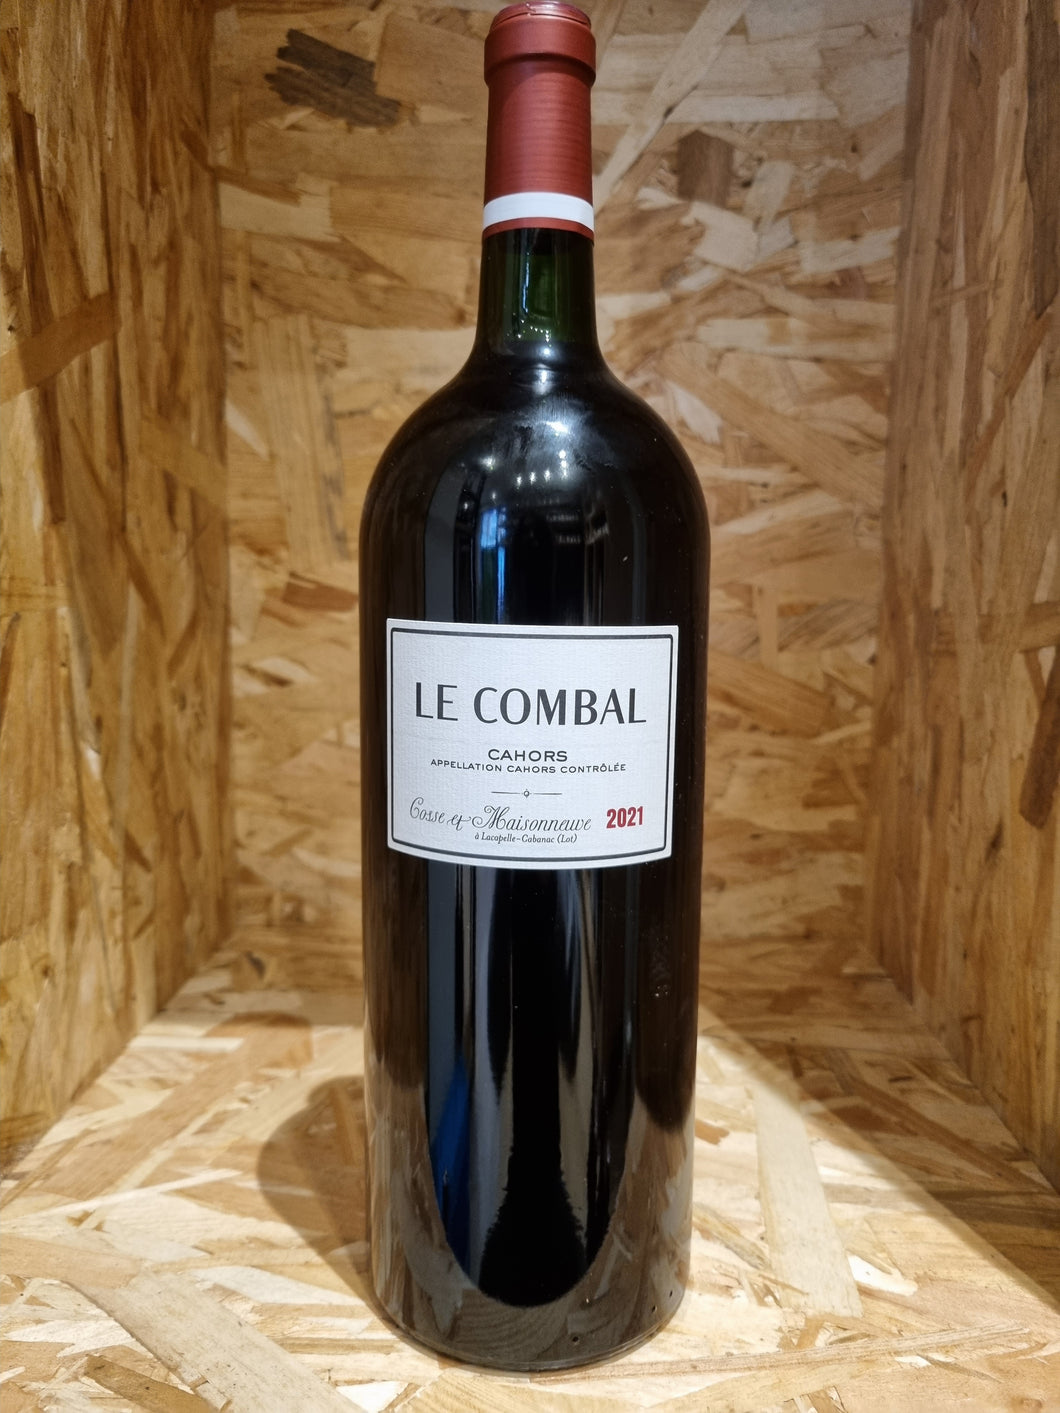 Le Combal Cahors 2021 - 1.5L